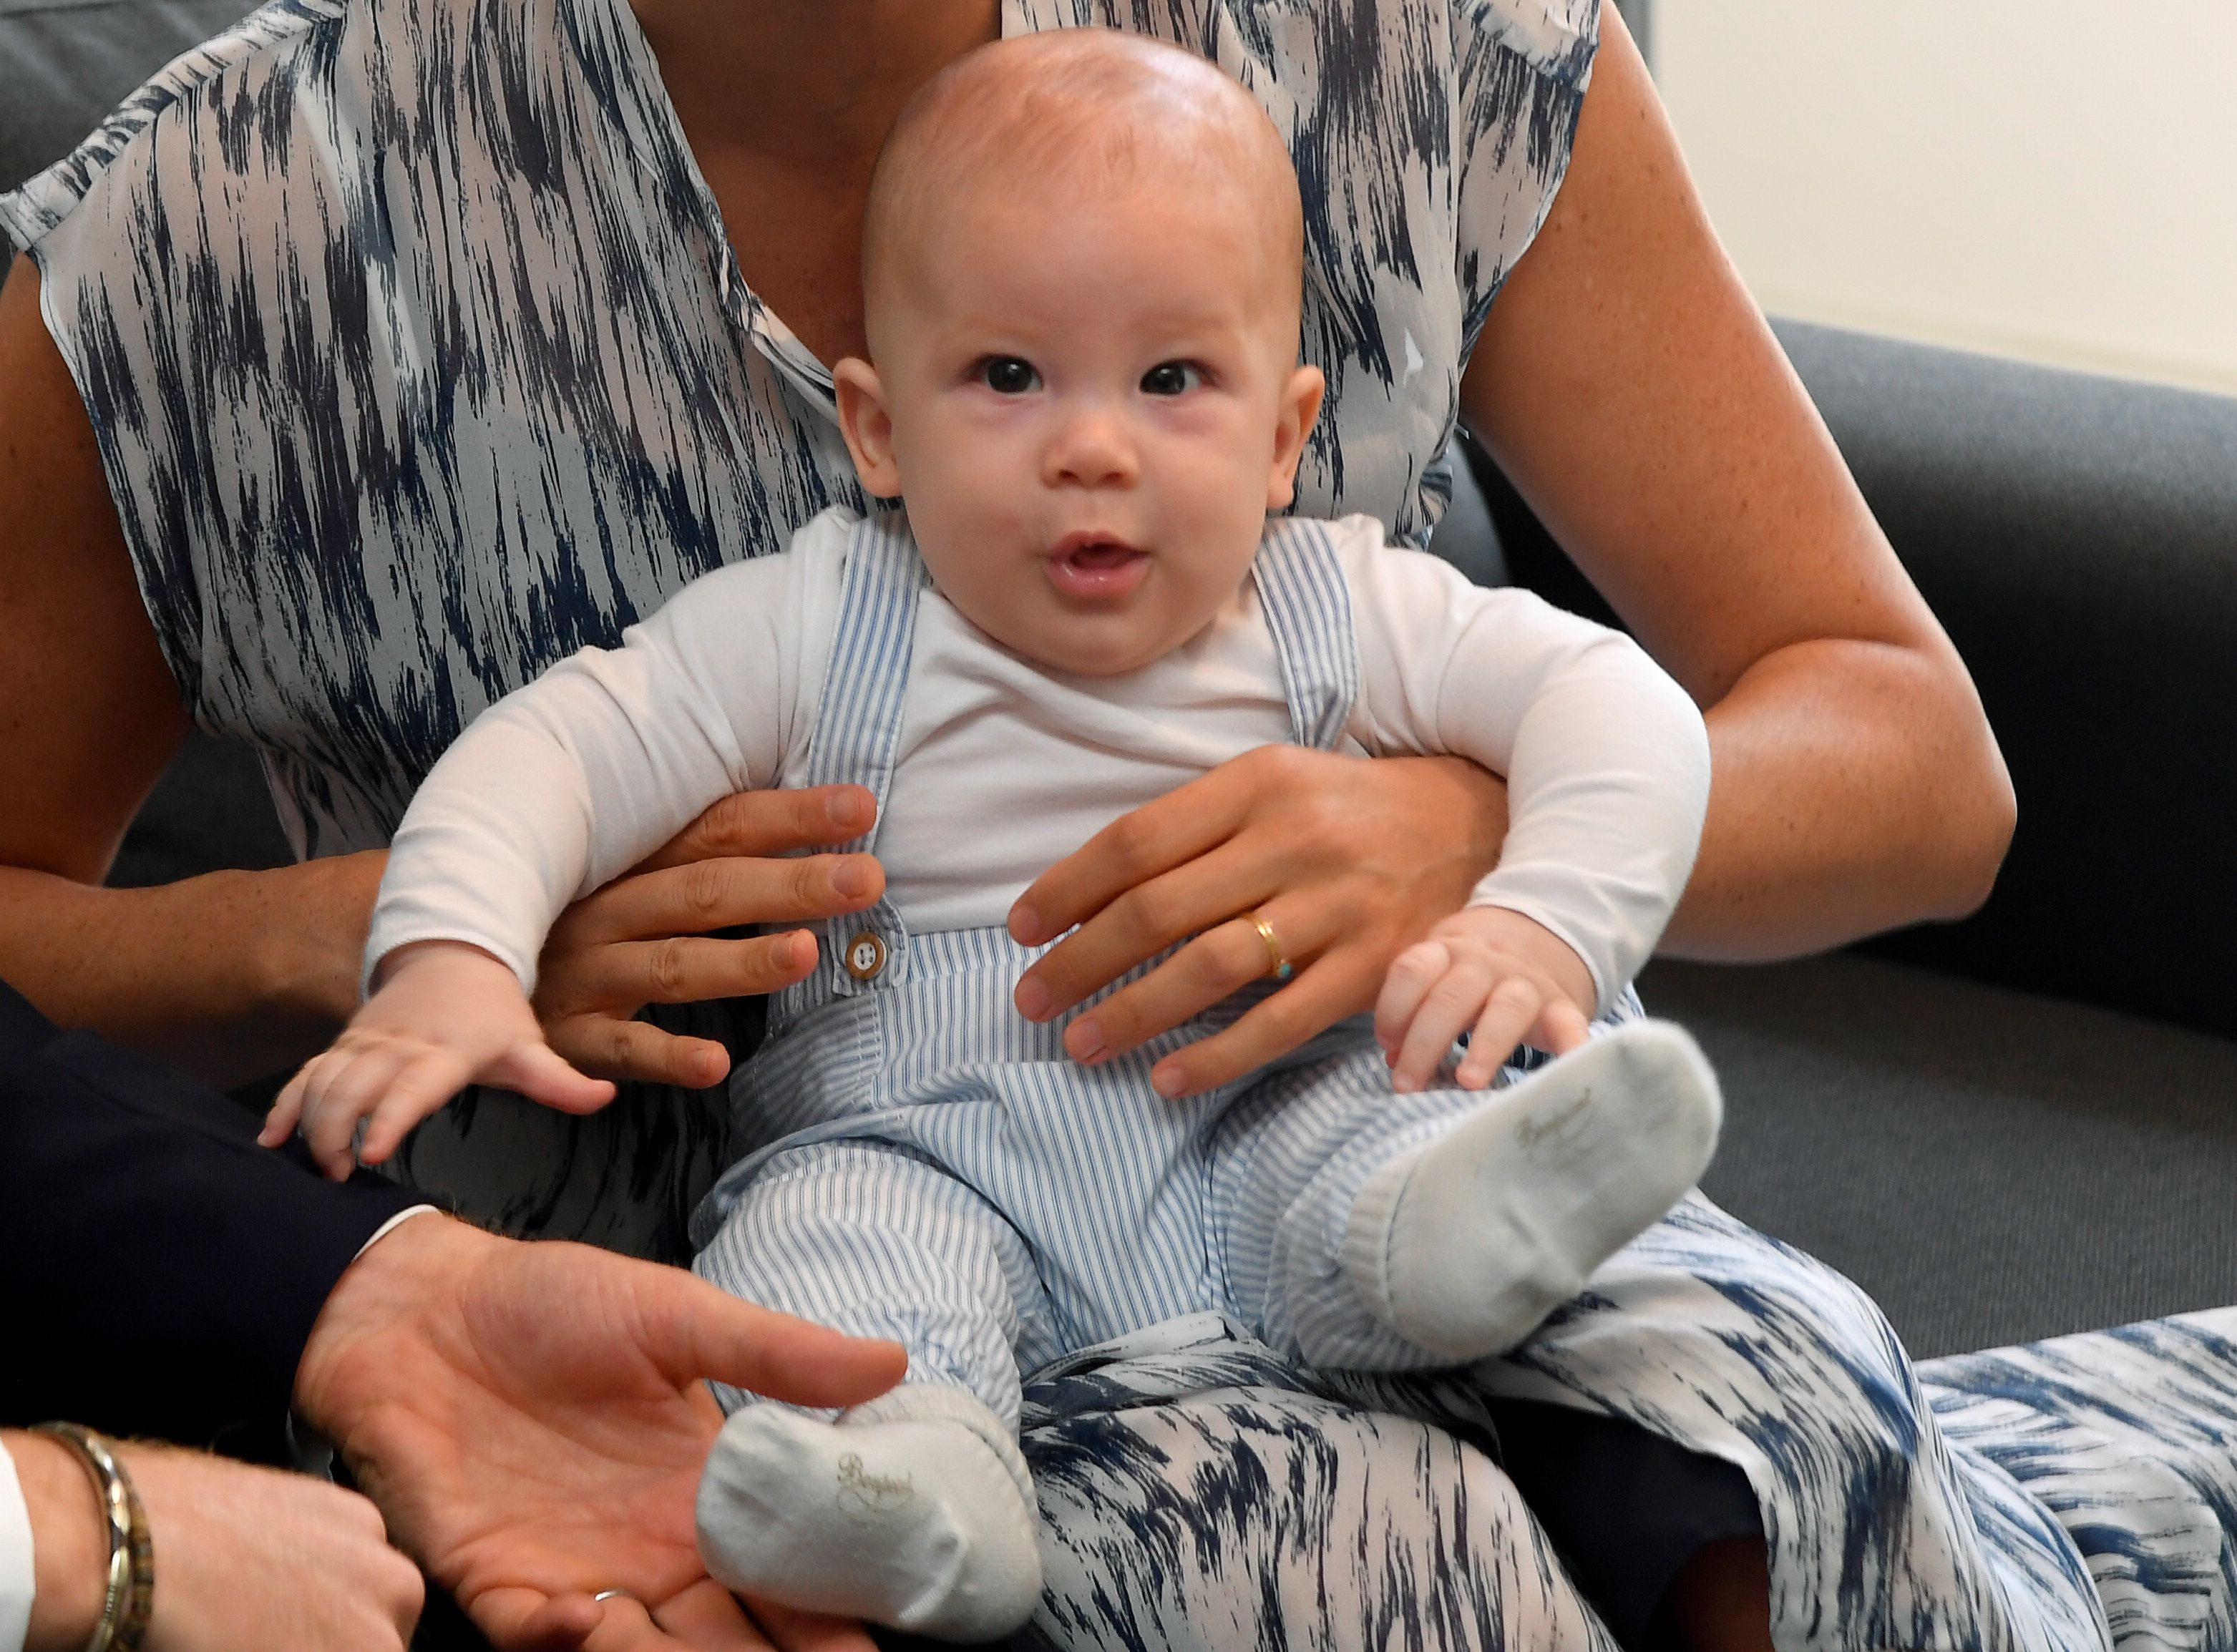 Archie Mountbatten-Windsor at the Desmond & Leah Tutu Legacy Foundation during their royal tour of South Africa on September 25, 2019 in Cape Town, South Africa. | Source: Getty Images